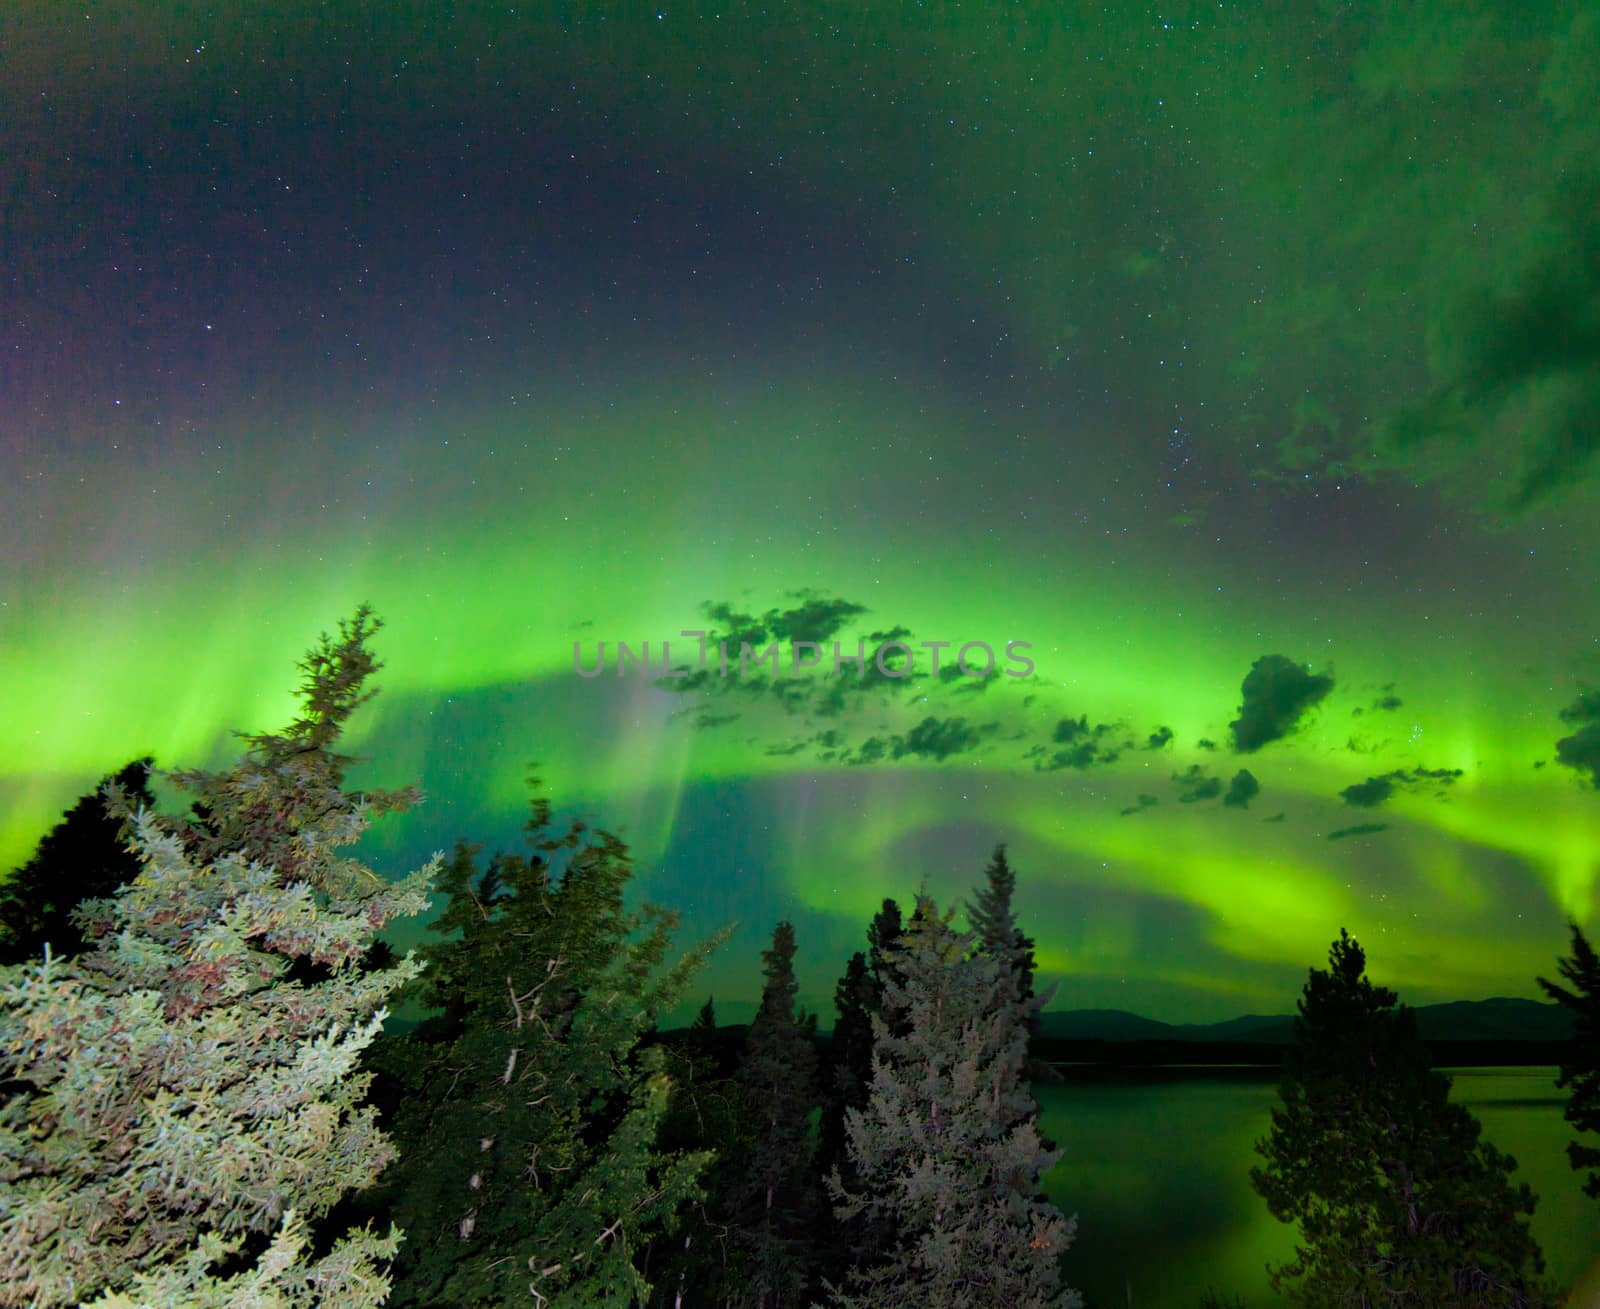 Intense green northern lights Aurora borealis on night sky with clouds and stars over boreal forest taiga of Lake Laberge Yukon Territory Canada